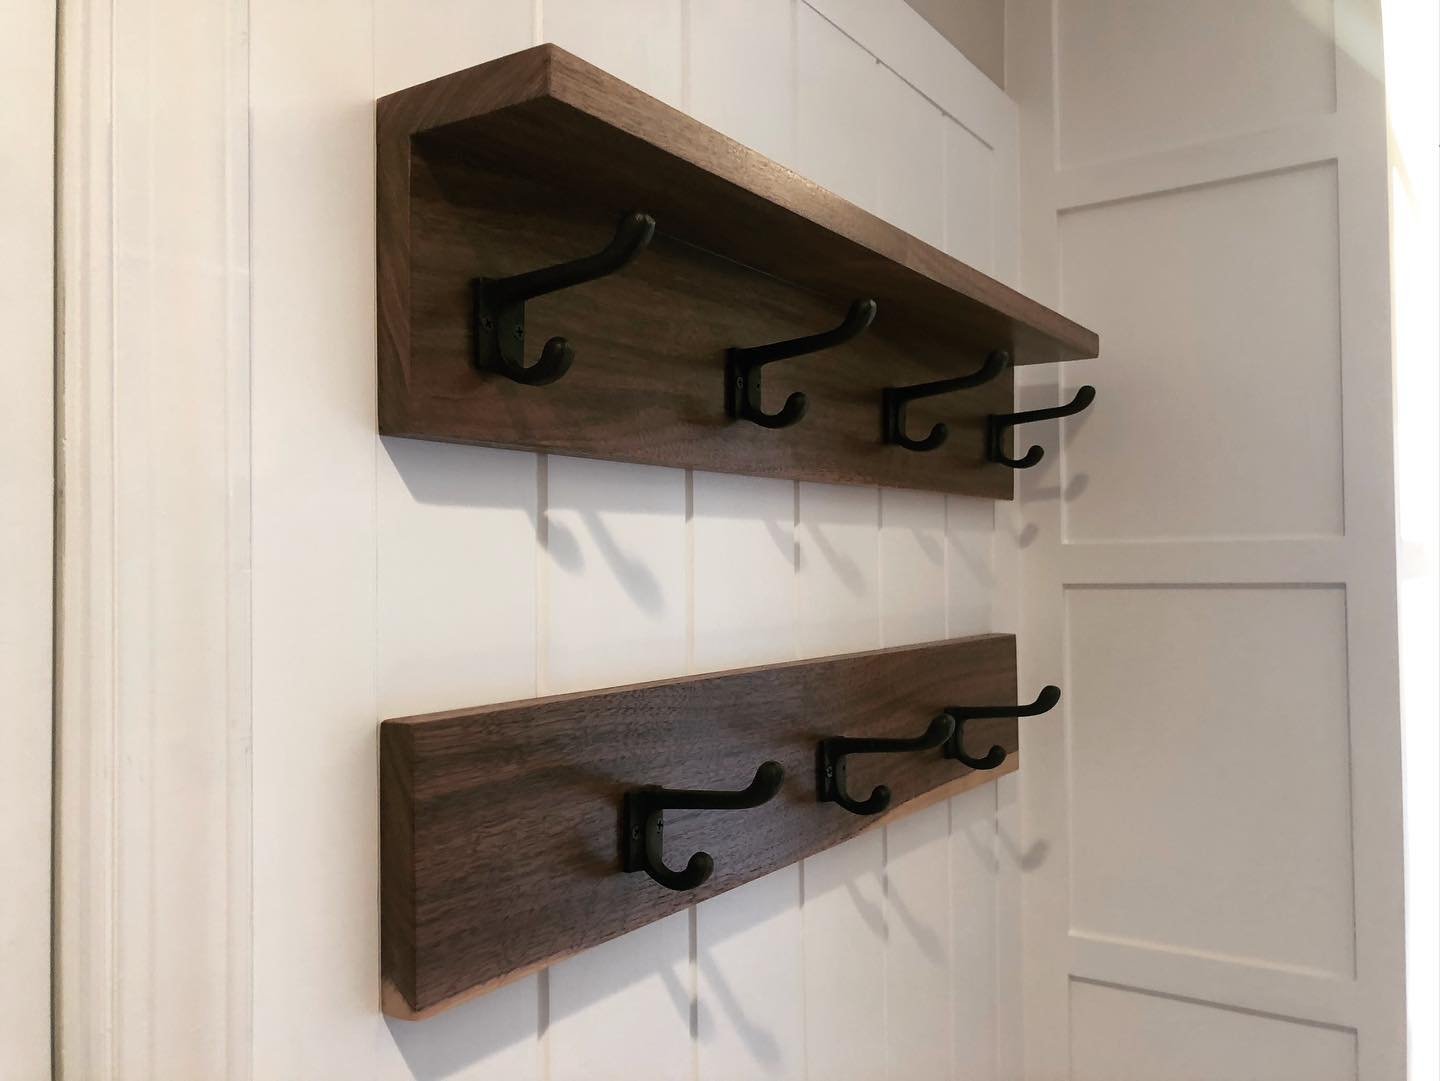  A close up of the hanging area. A double row of hooks is mounted on black walnut boards to match the benchtops, the shelf above provide additional storage for smaller items, and it’s all mounted on custom wide wainscot paneling.  